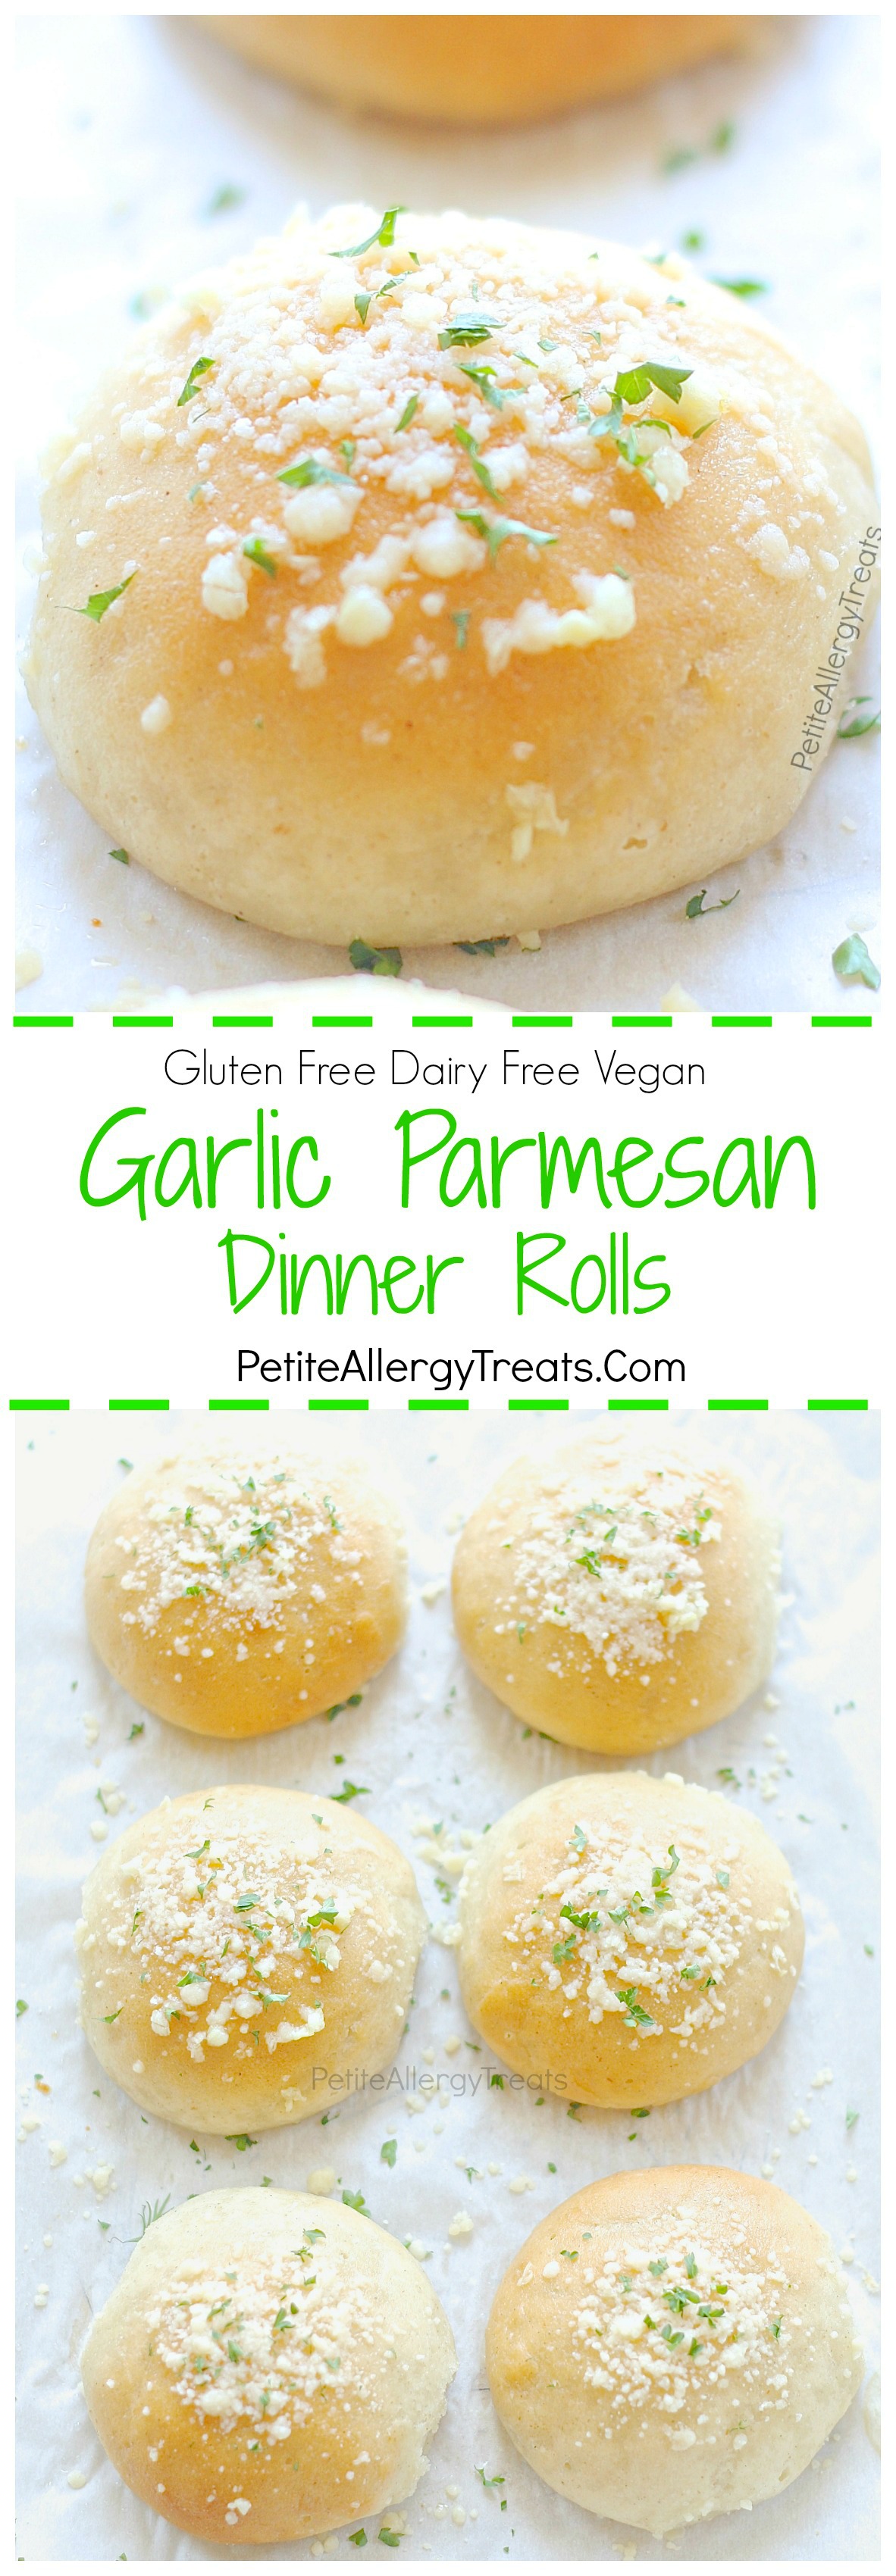 Garlic Parmesan Gluten Free Dinner Rolls Recipe (dairy free vegan)- Light and fluffy garlic parmesan gluten free rolls or hamburger buns. Soft and delicious warm from the oven. Food Allergy friendly too!